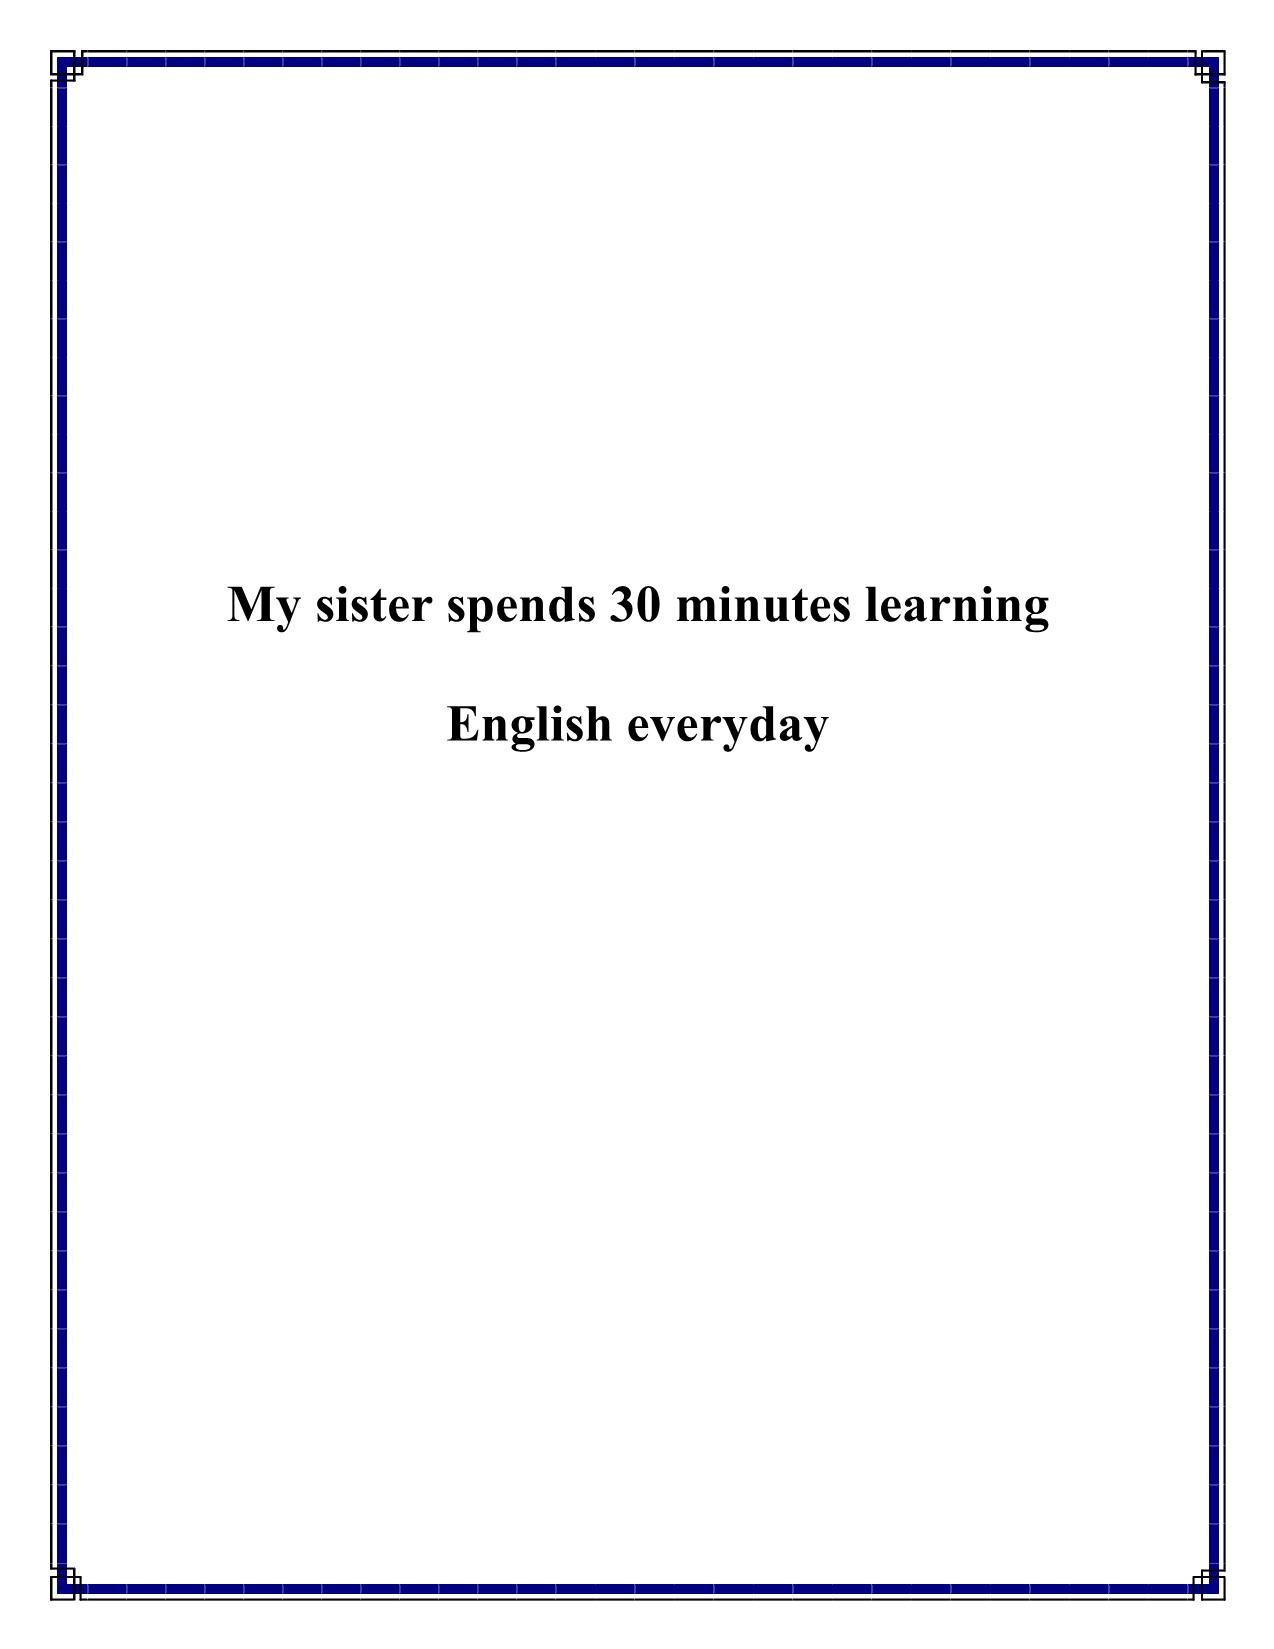 My sister spends 30 minutes learning English everyday trang 1